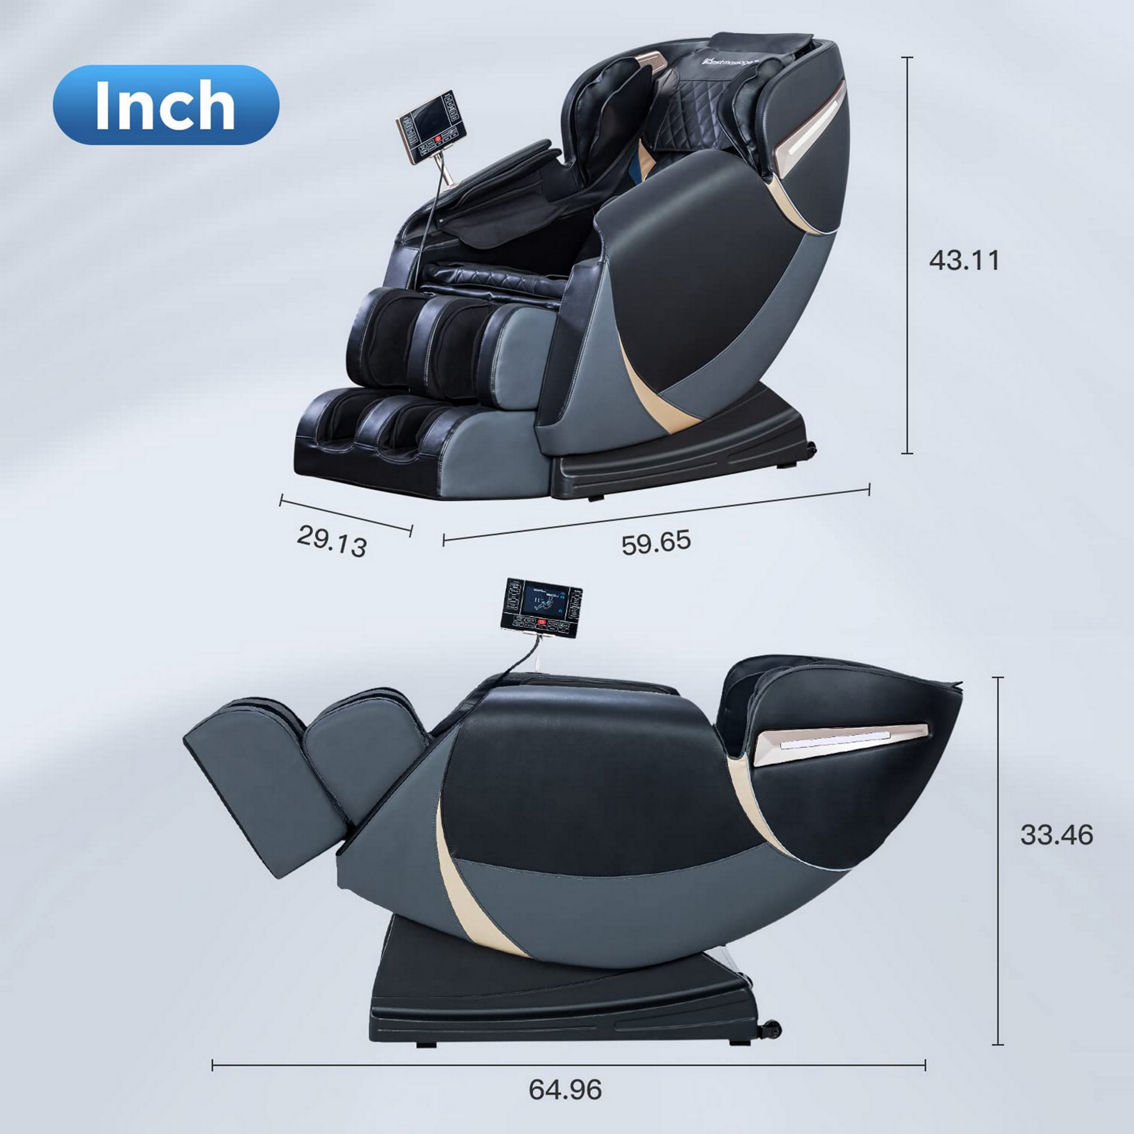 Furniture of America Monser Massage Chair - Image 3 of 10